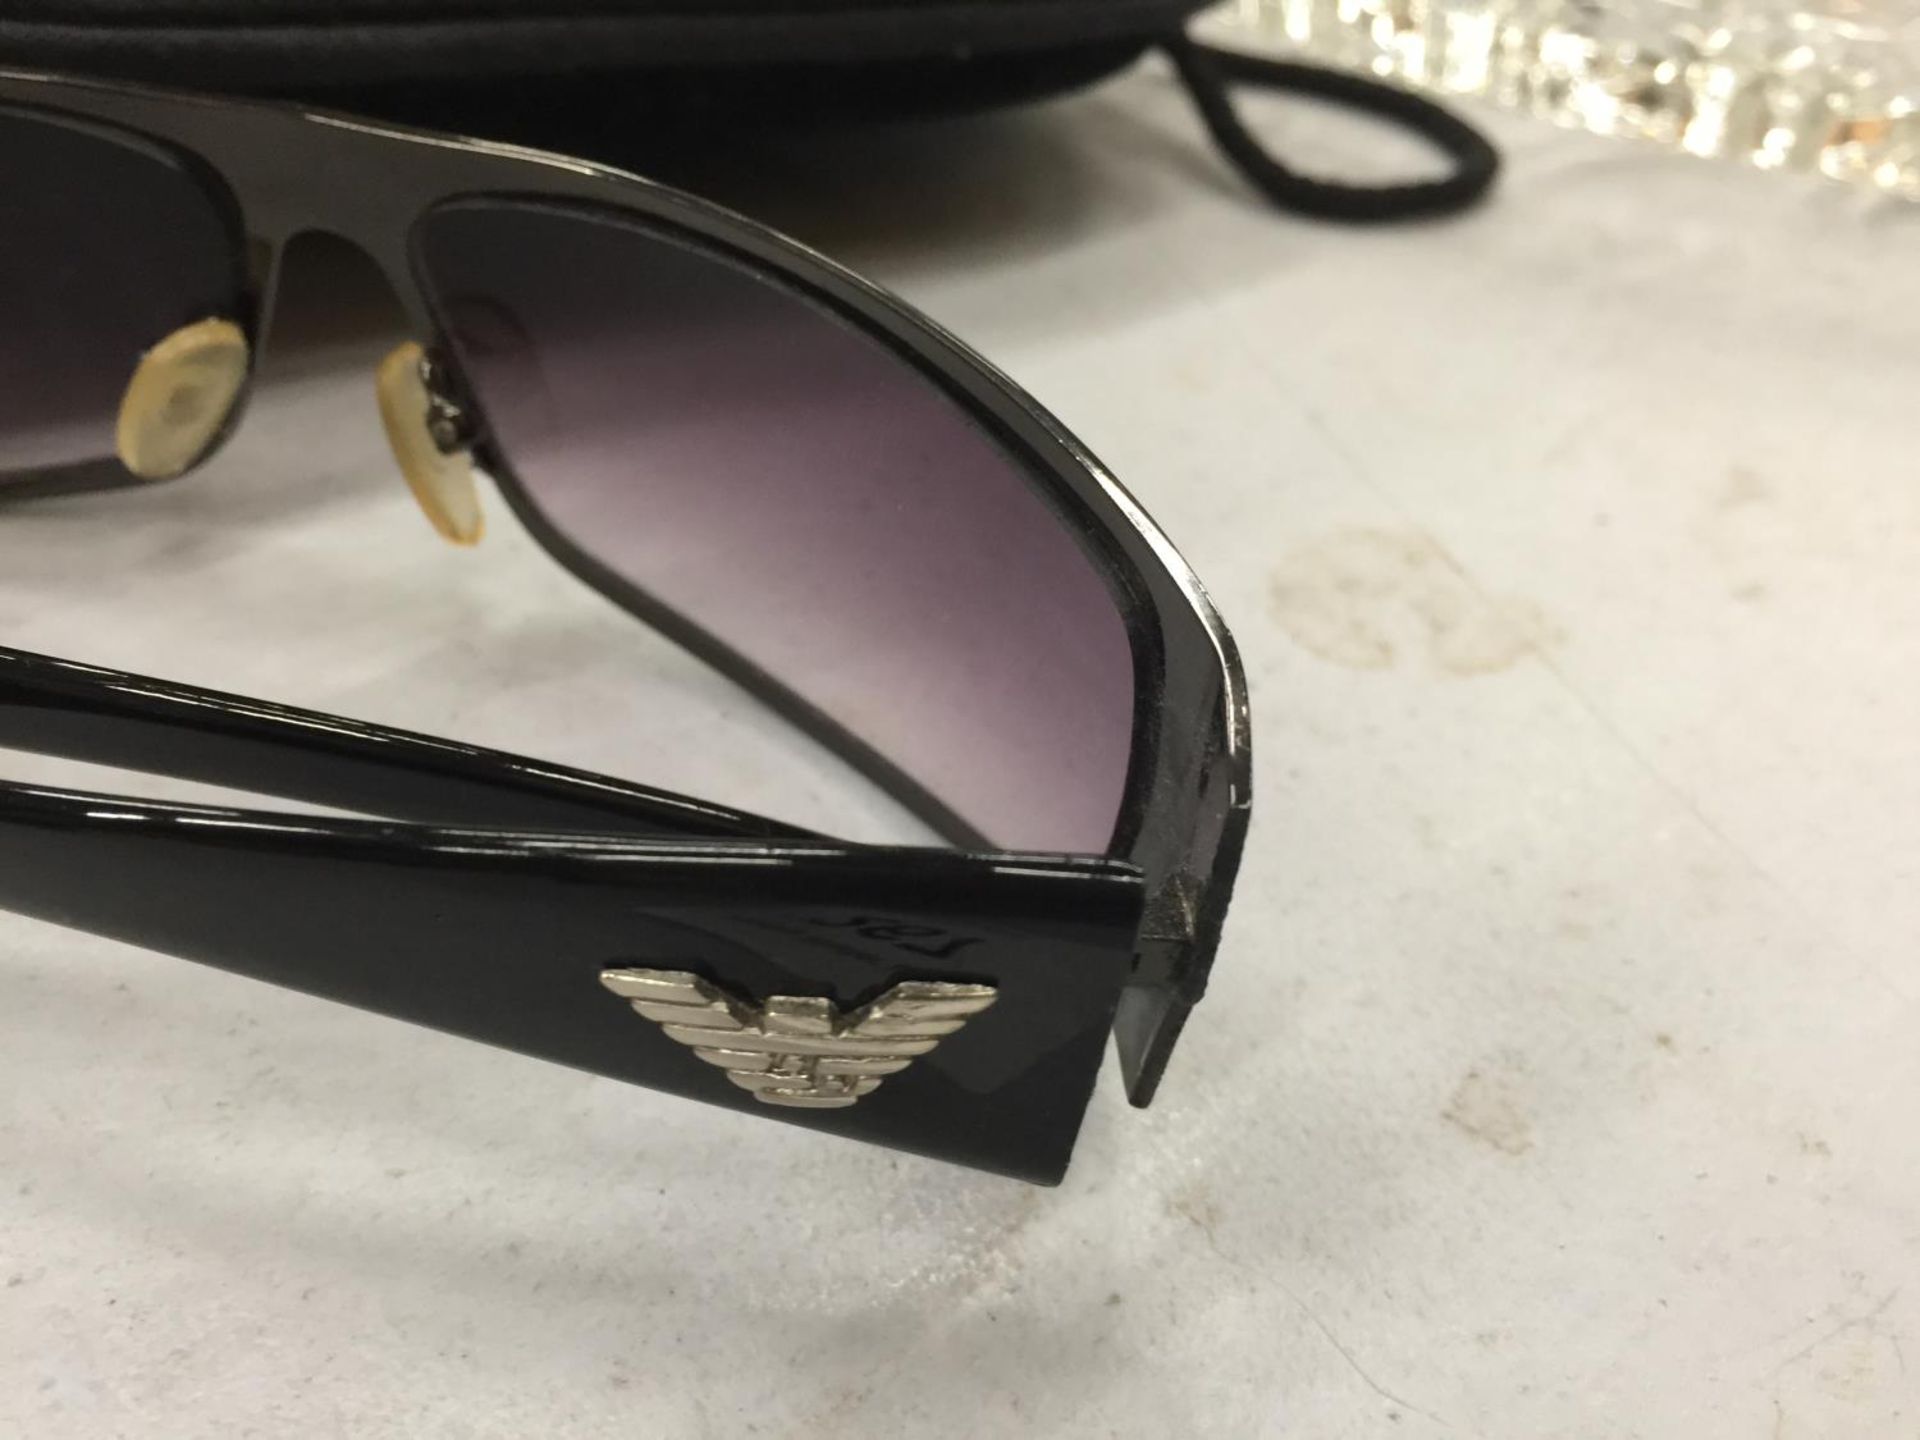 A PAIR OF SUNGLASSES WITH THE ARMANI LOGO ON IN AN EMBROIDERED CASE - Image 6 of 6